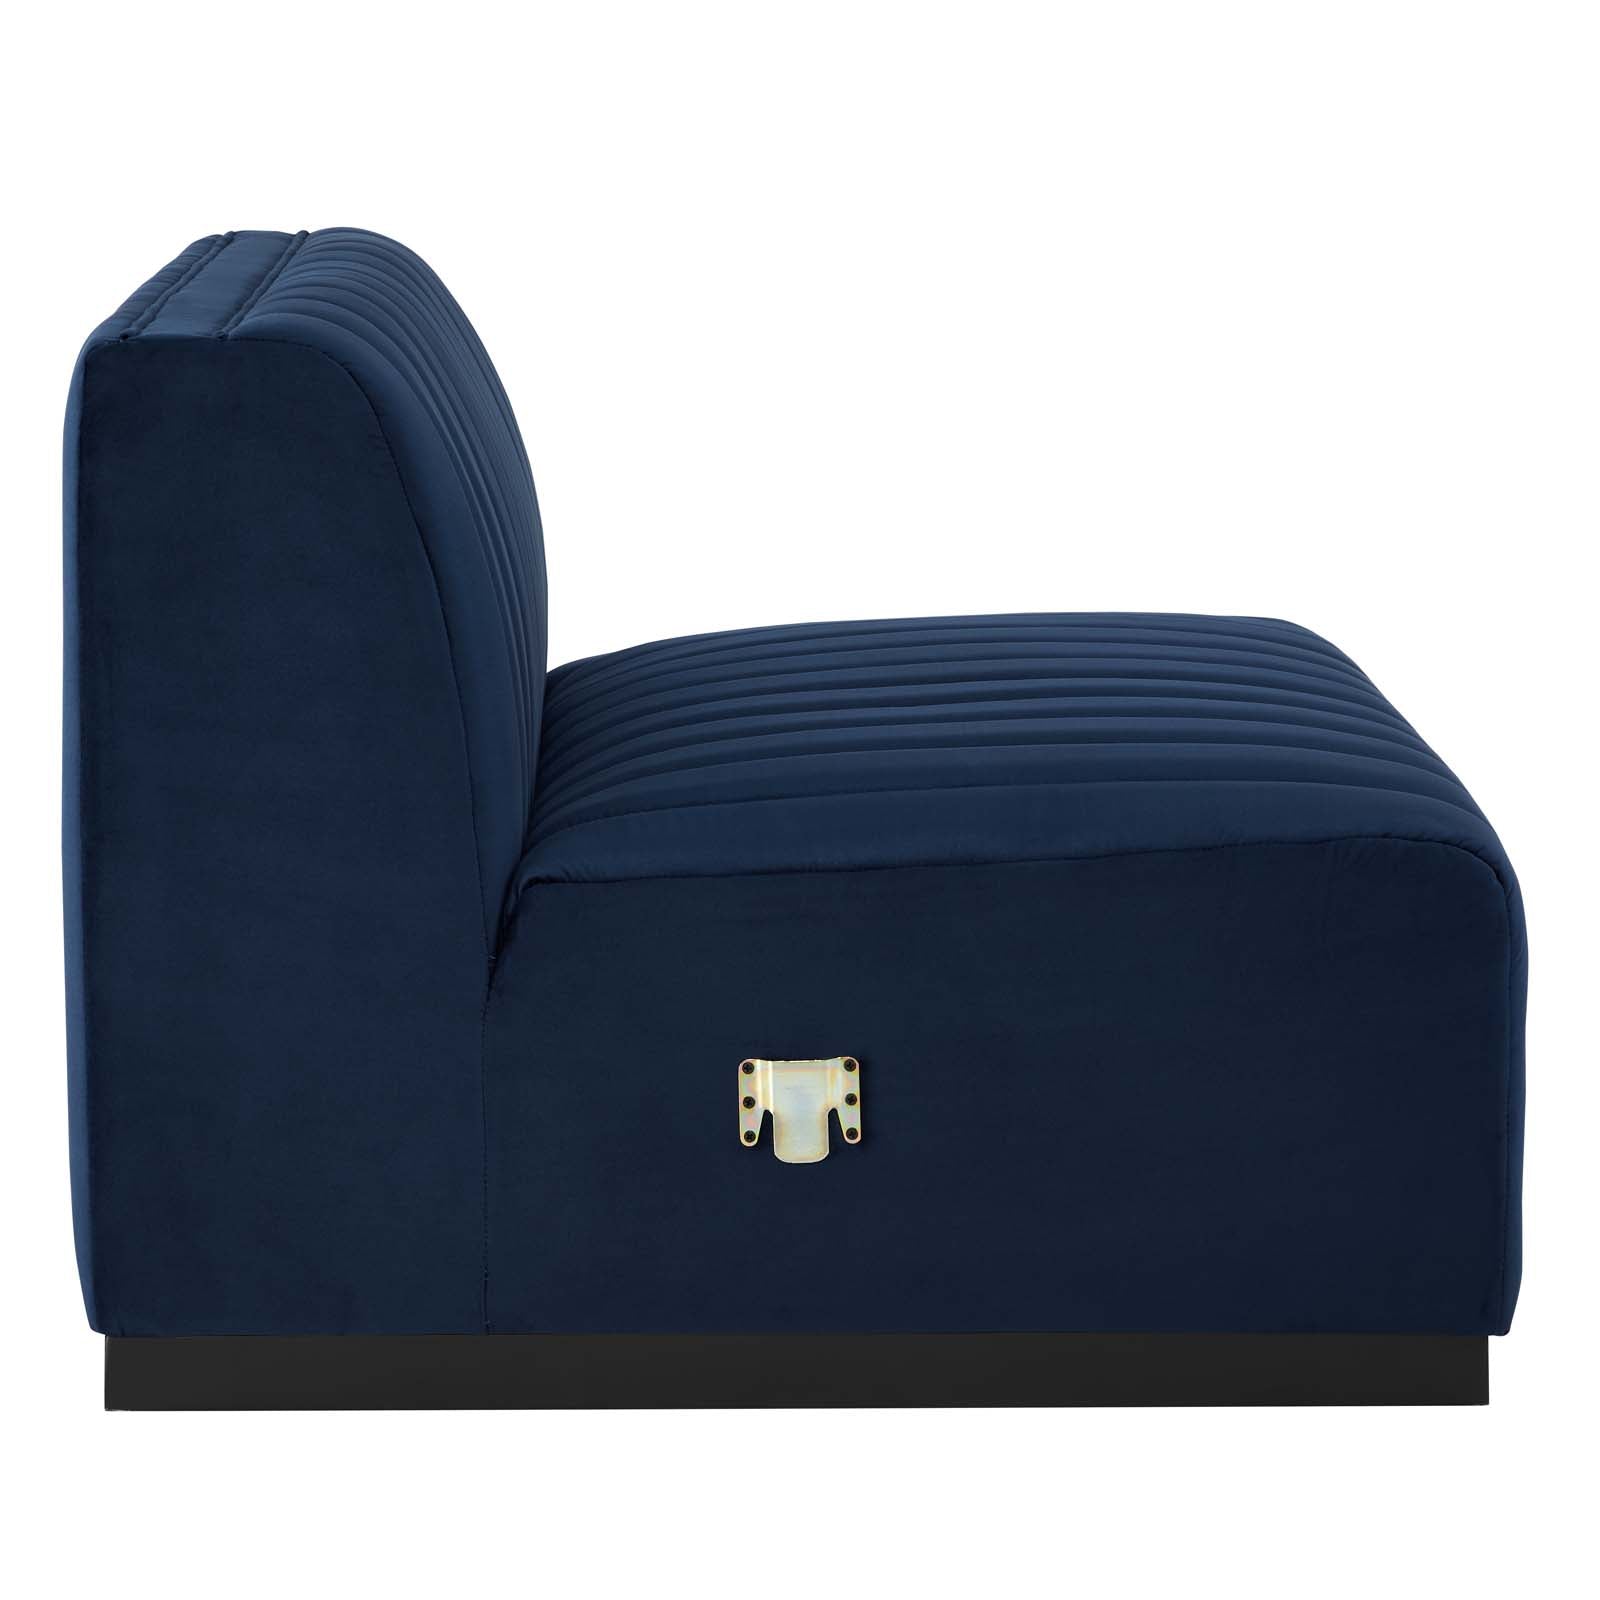 Modway Accent Chairs - Conjure Channel Tufted Performance Velvet Armless Chair Black Midnight